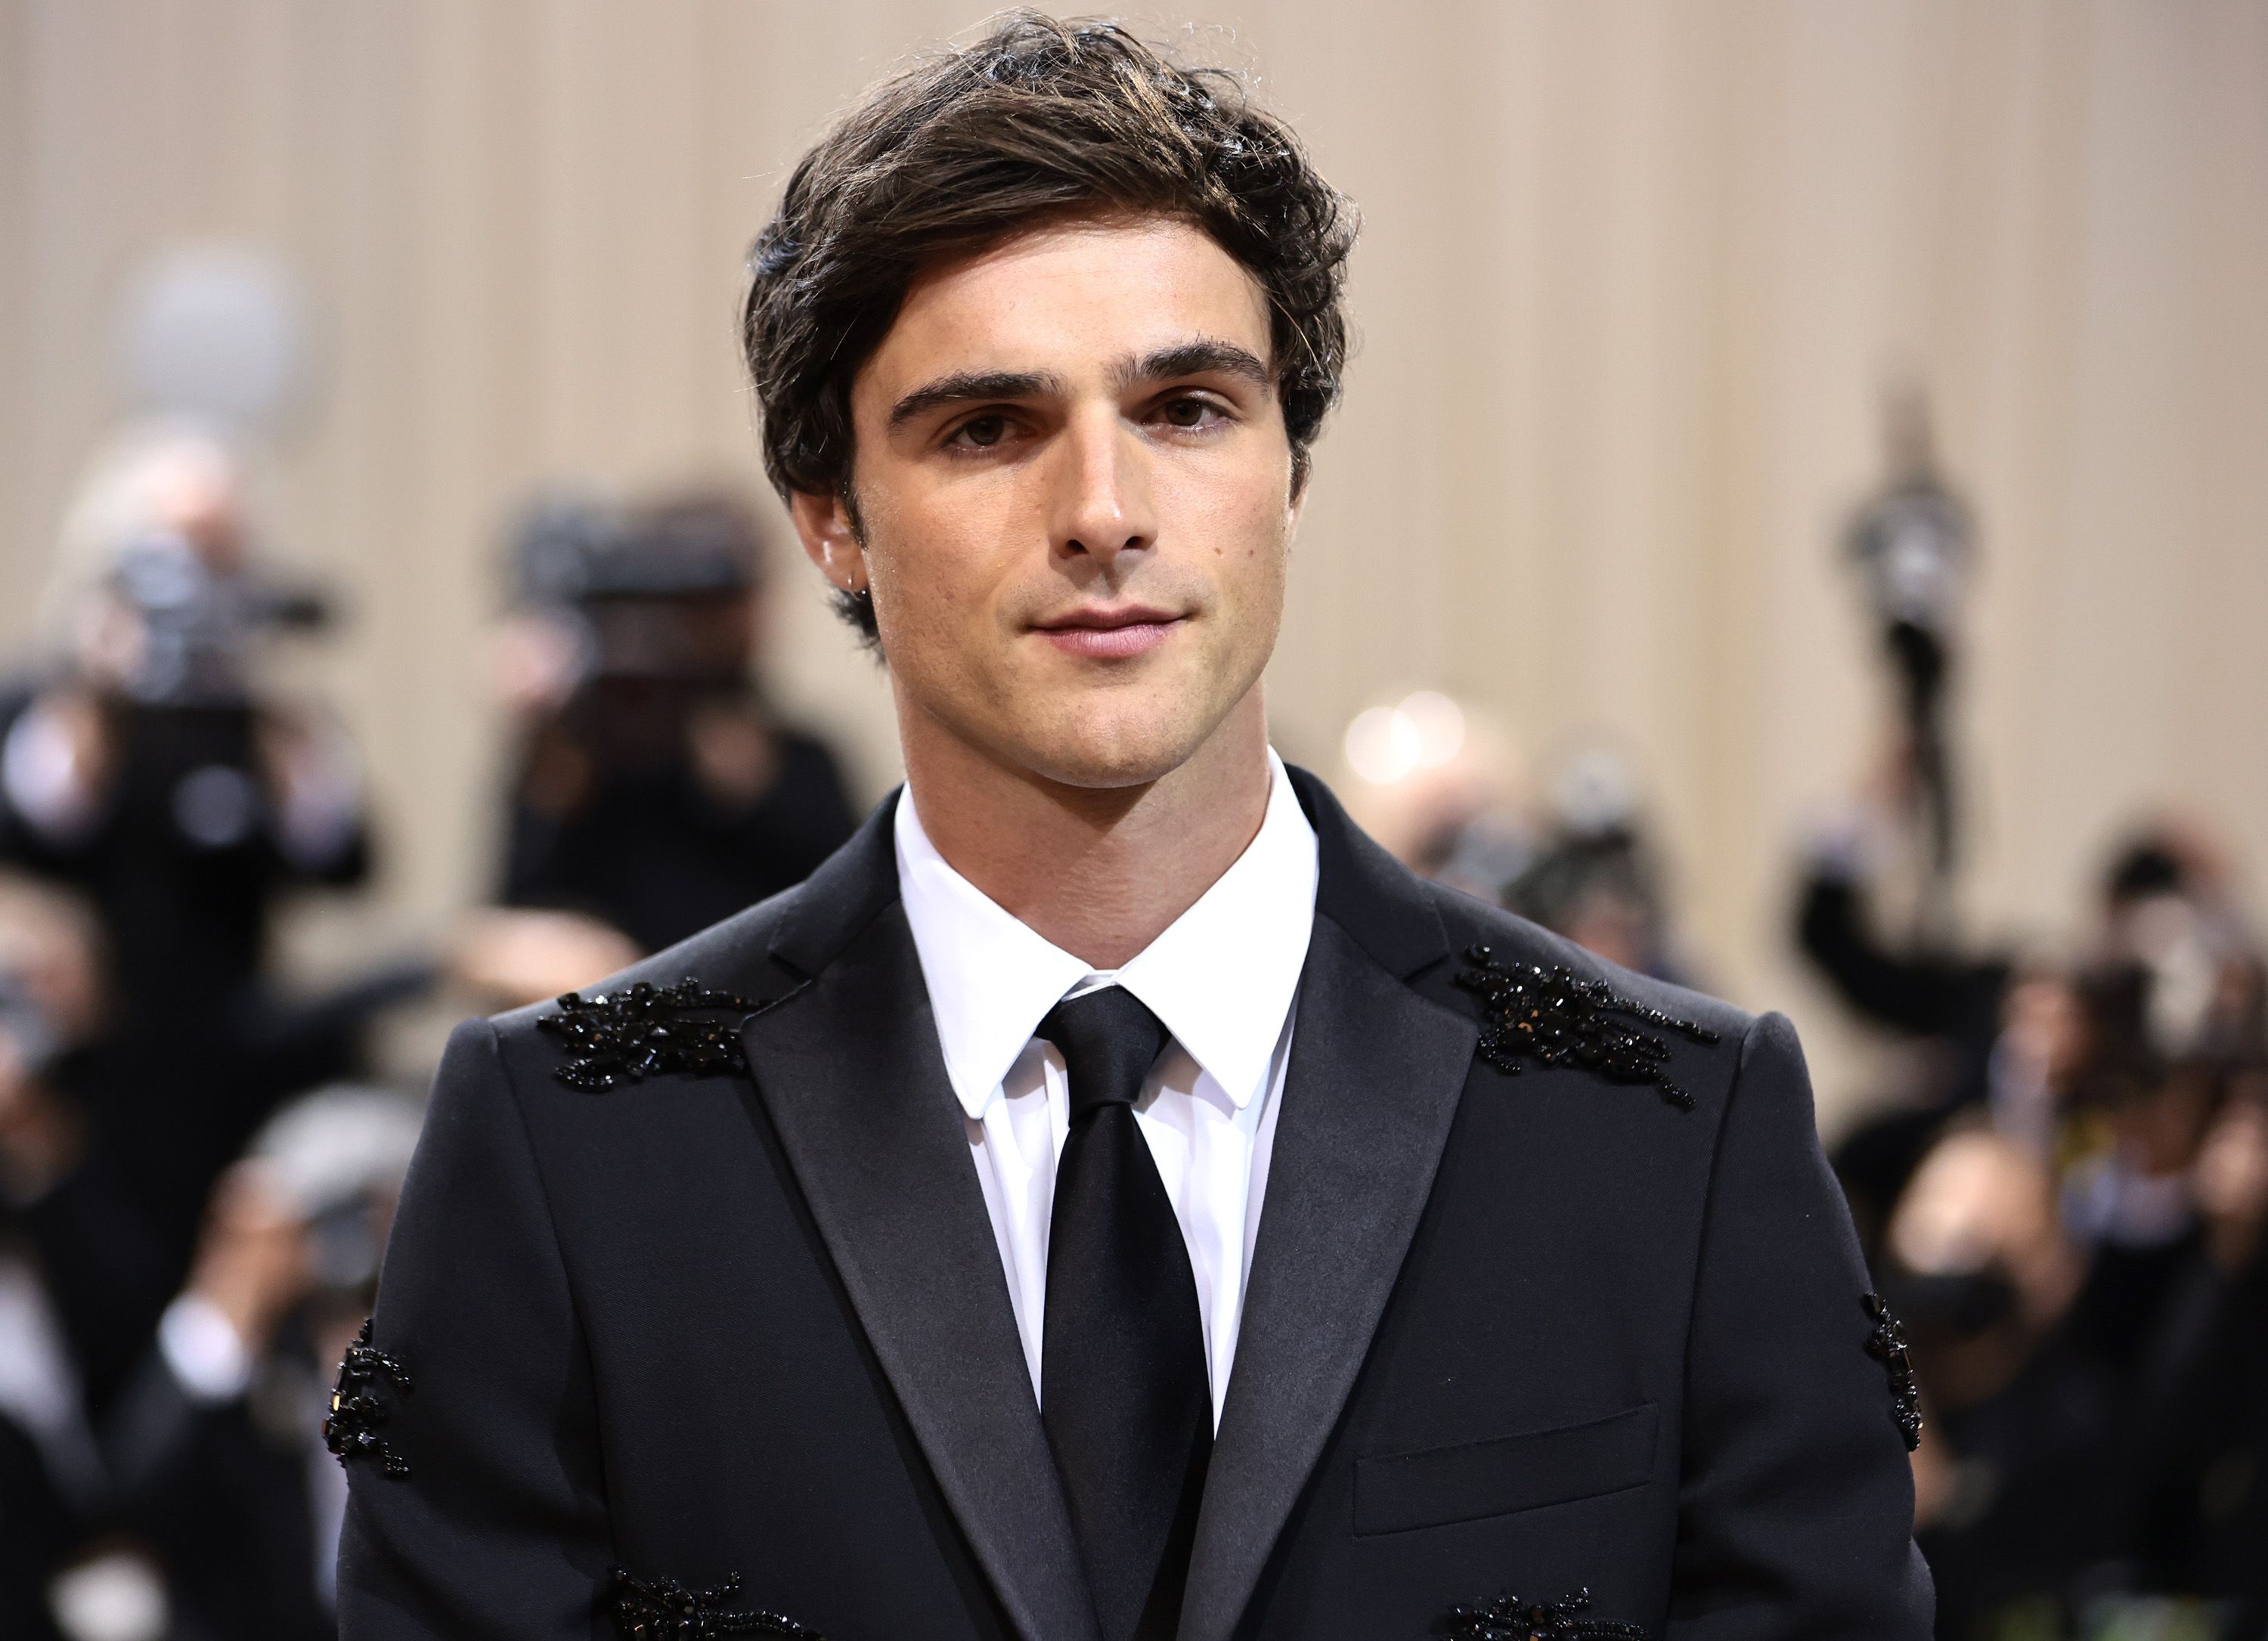 Jacob Elordi was about to leave the interpretation Celebrity Gossip News